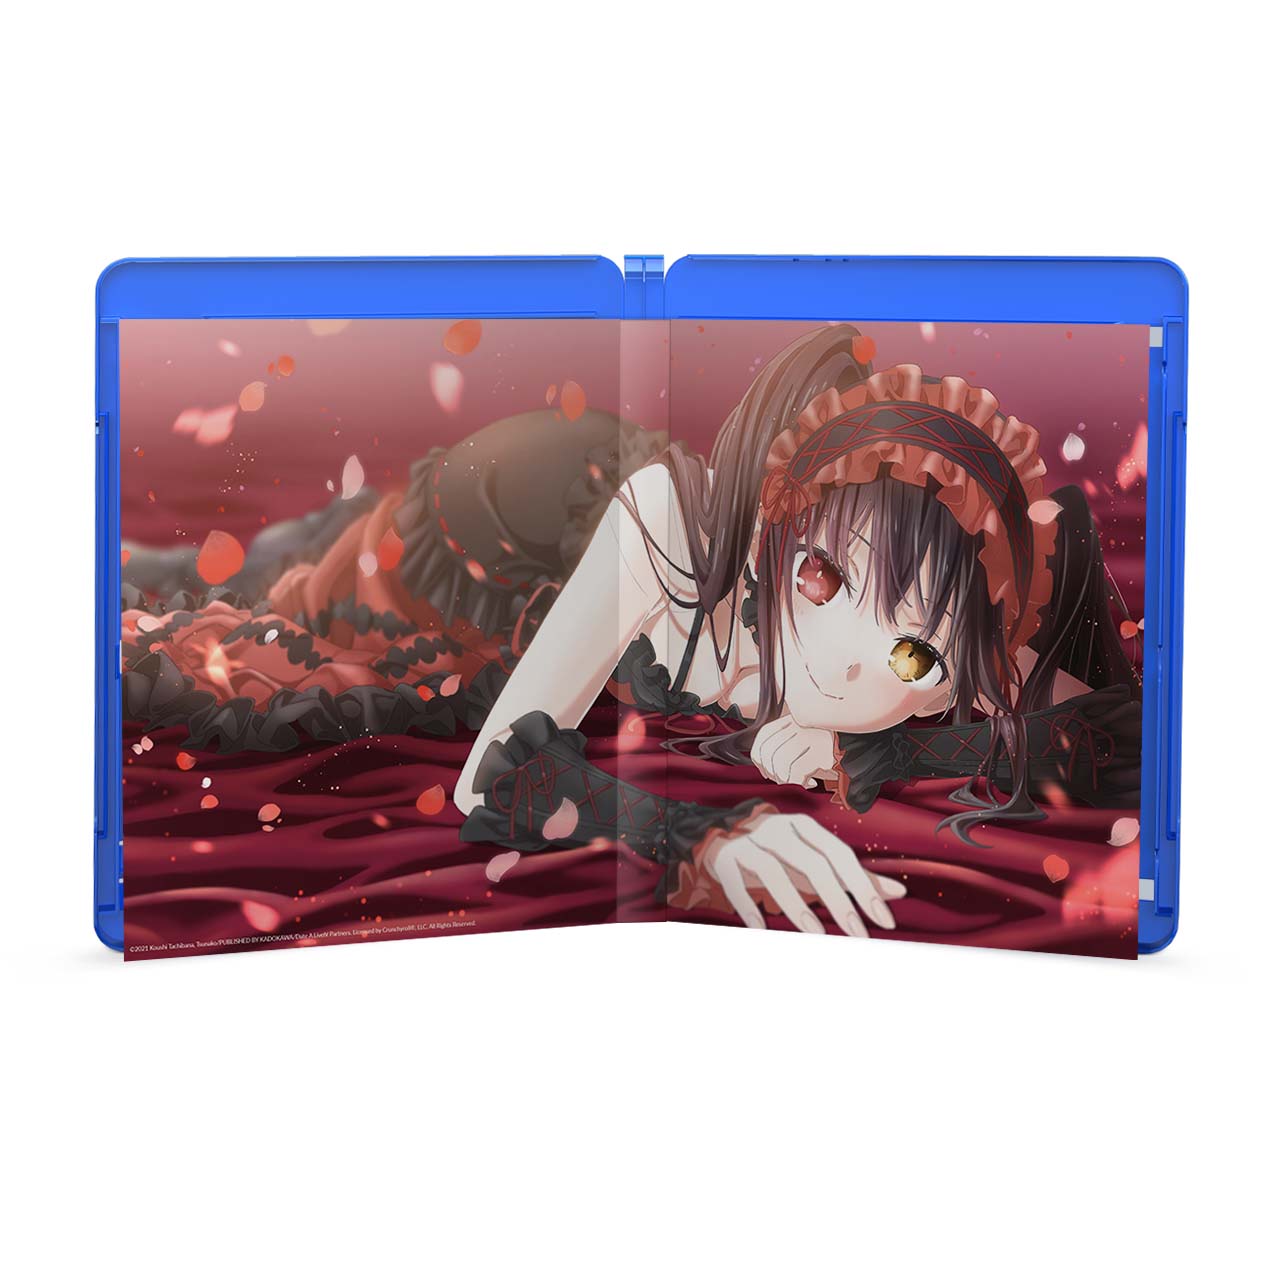 animate】(DVD) Date A Live IV TV Series DVD BOX Part 1 [Regular  Edition]【official】